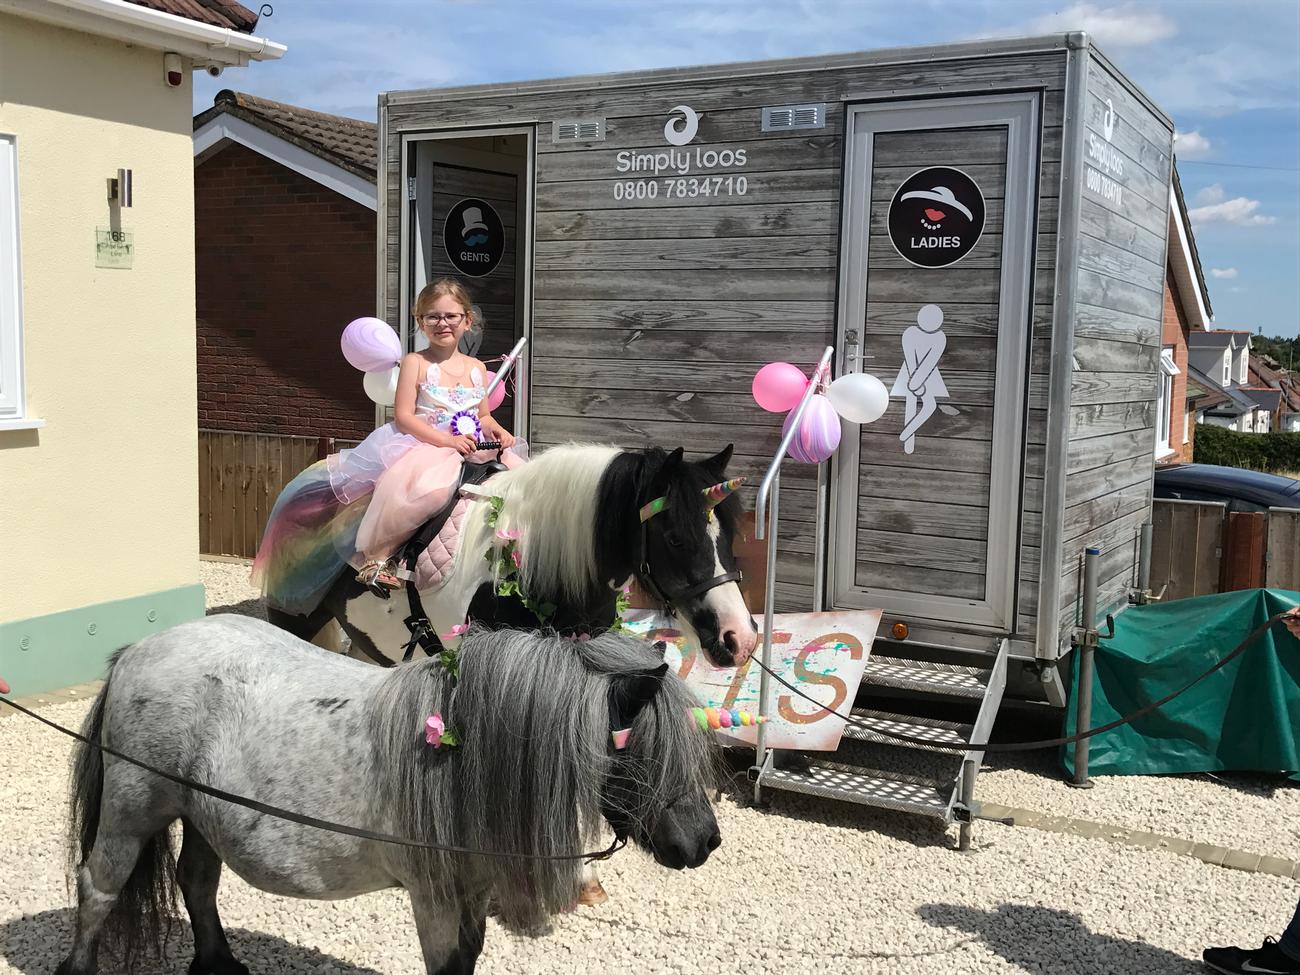 Pony at my party. Pony rides at your party essex | pony at my party gallery image 6